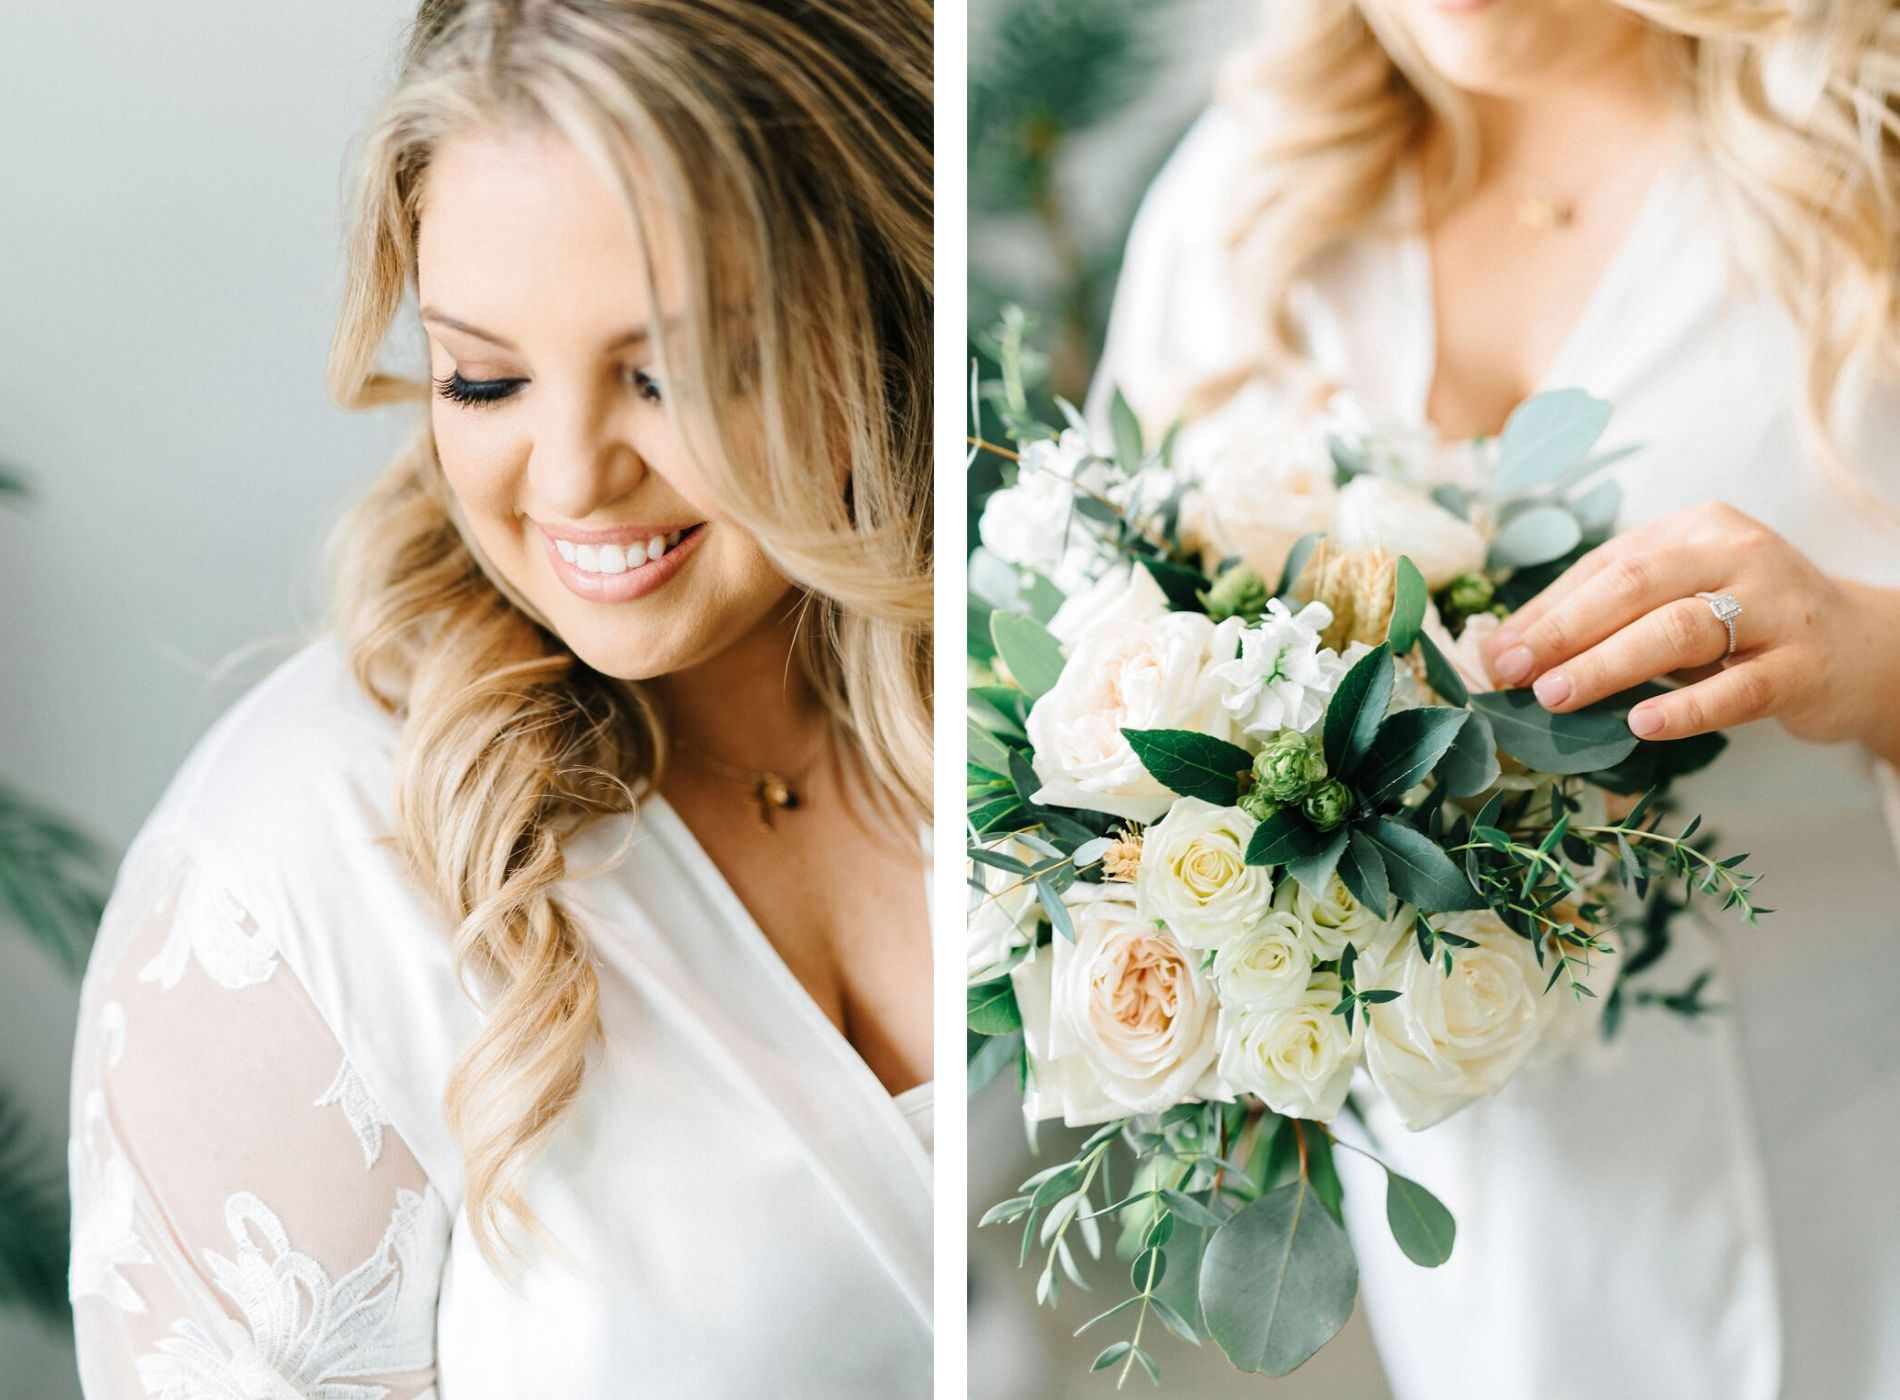 Classic Florida Bride Getting Wedding Ready with Elegant Bridal Bouquet, Ivory Roses, White Flowers and Blush Pink Florals, With Greenery | Tamp Wedding Planner UNIQUEnWeddings and Events